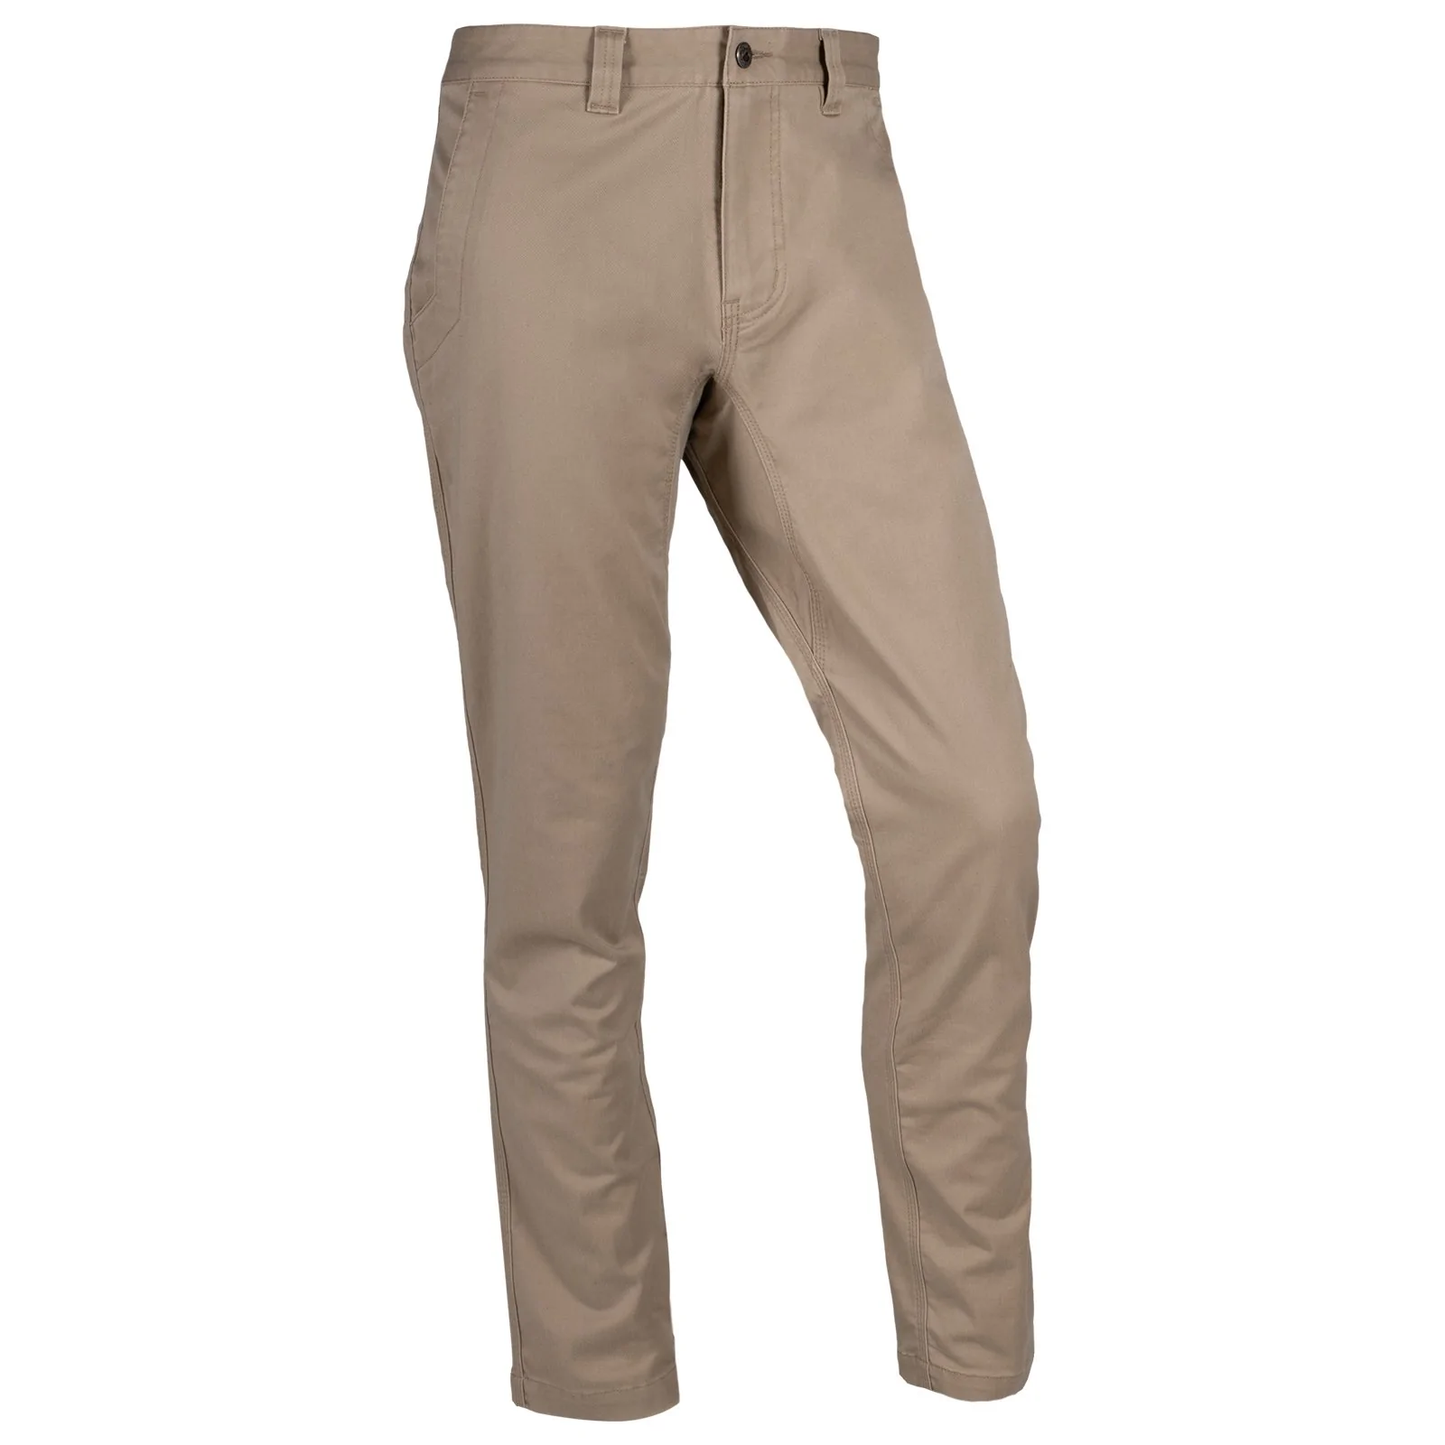 Teton Pant - Relaxed Fit - Rivers & Glen Trading Co.